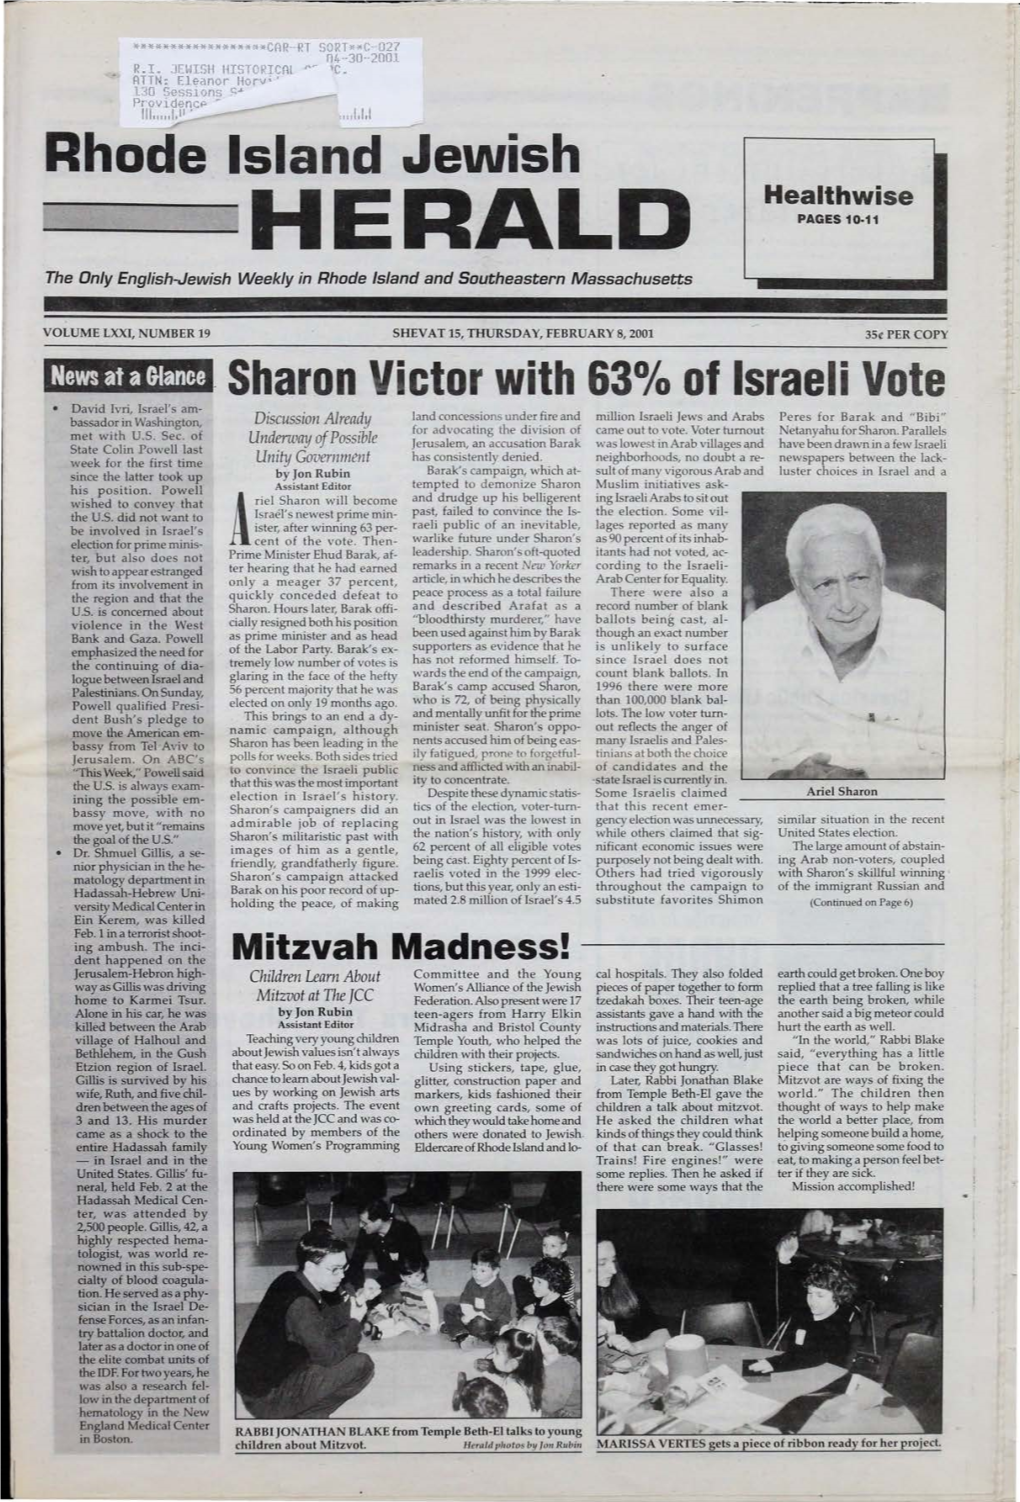 HERALD PAGES 10-11 the Only English-Jewish Weekly in Rhode Island and Southeastern Massachusetts